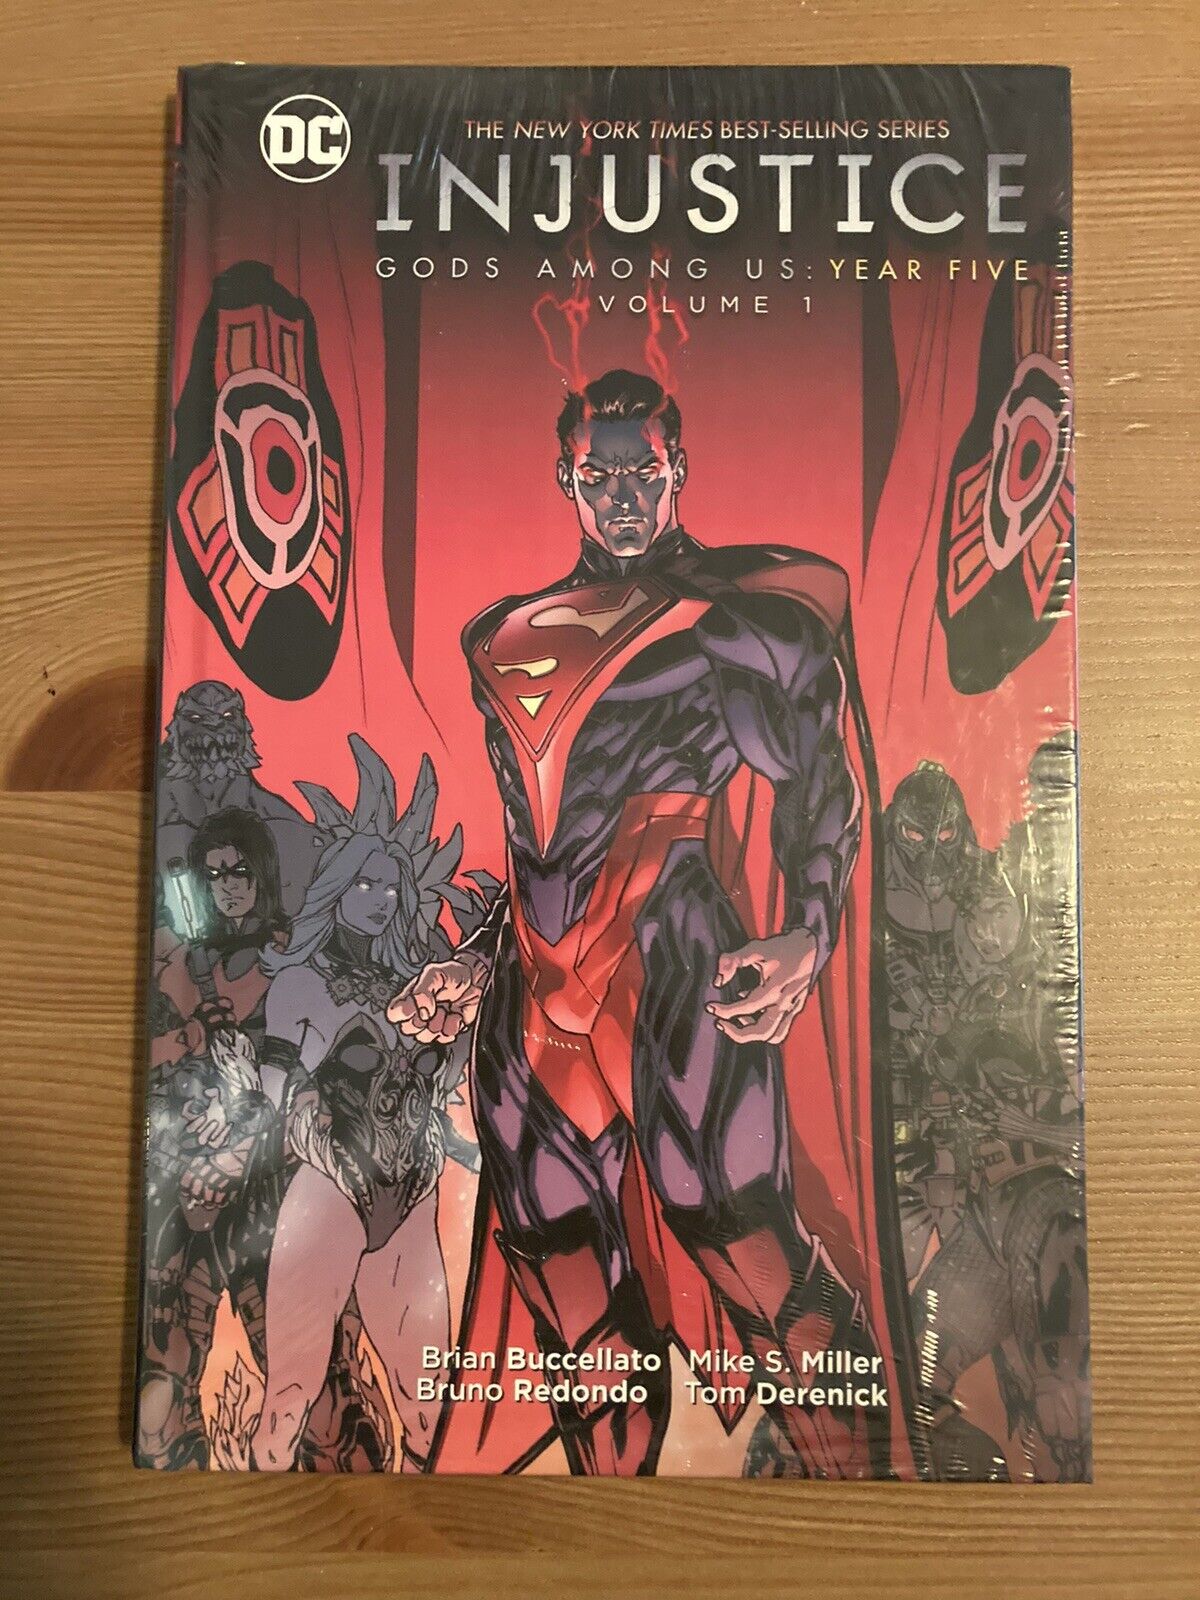 (SEALED) Injustice: Gods Among US-Year Five #1 Hardcover ISBN 9781401267681